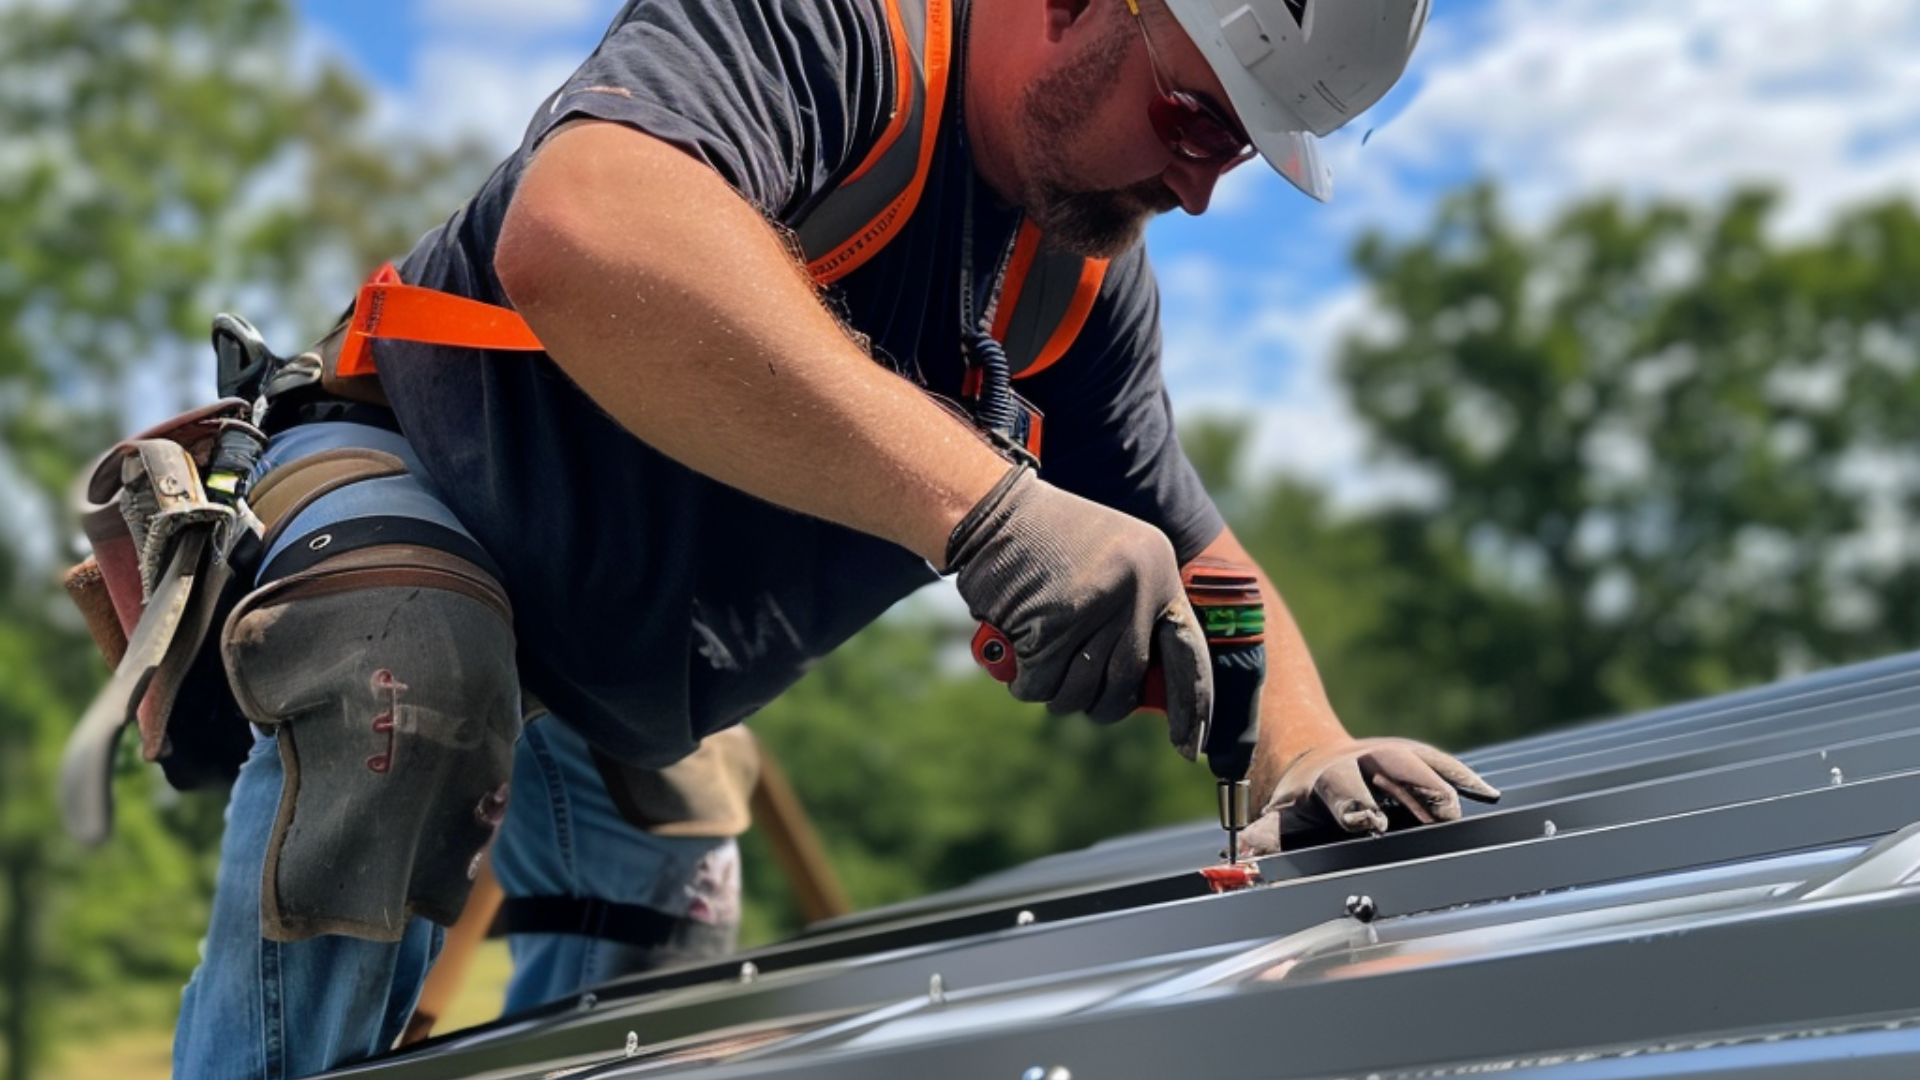 Roofer is doing a residential metal roof installation. he is drilling washer head roofing screw. The metal roof is clean and properly installed. The roofer is wearing the appropriate and complete safety gear.